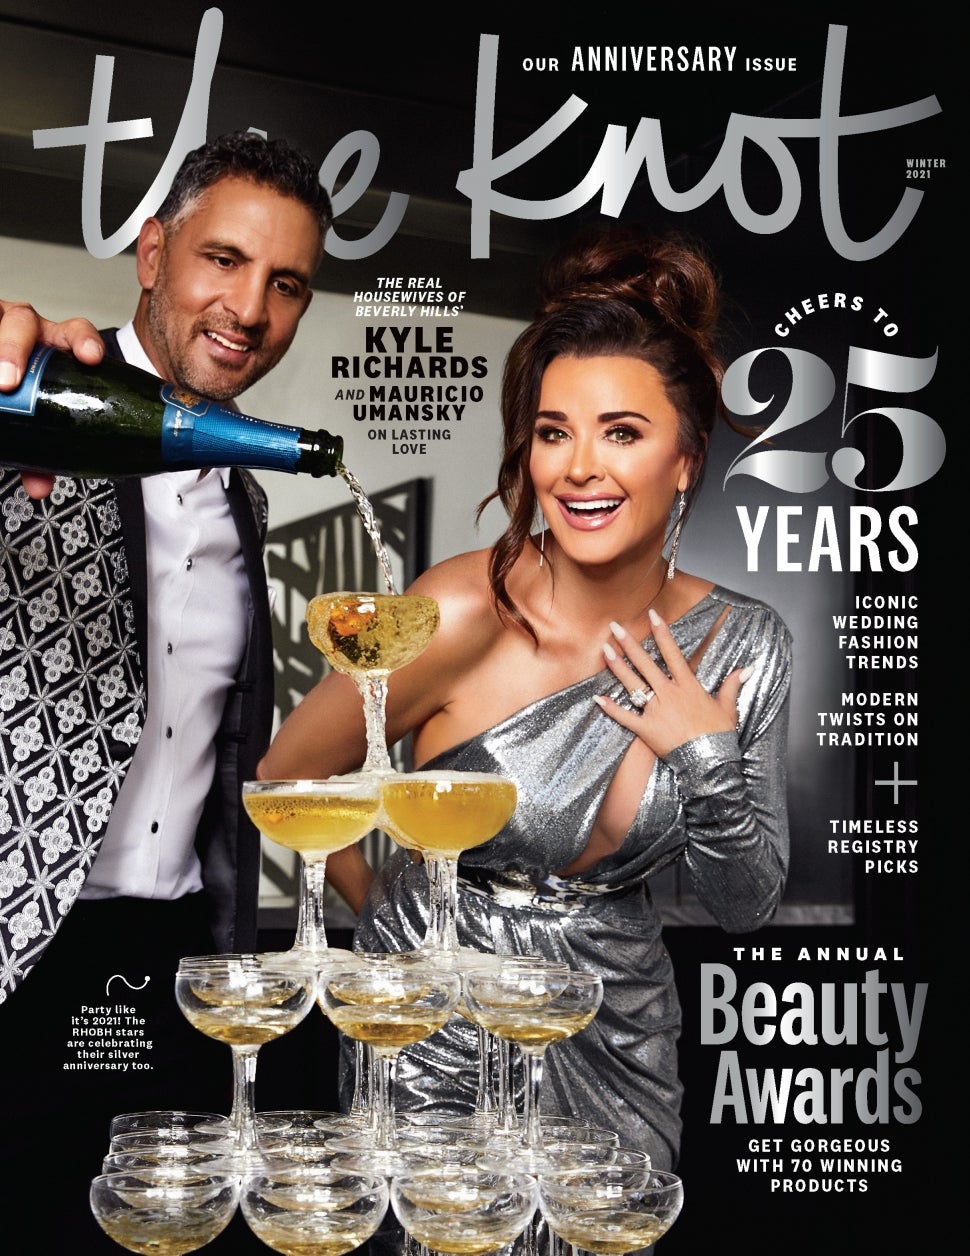 Mauricio Umansky and Kyle Richards pose for the cover of 'The Knot's 25th anniversary issue